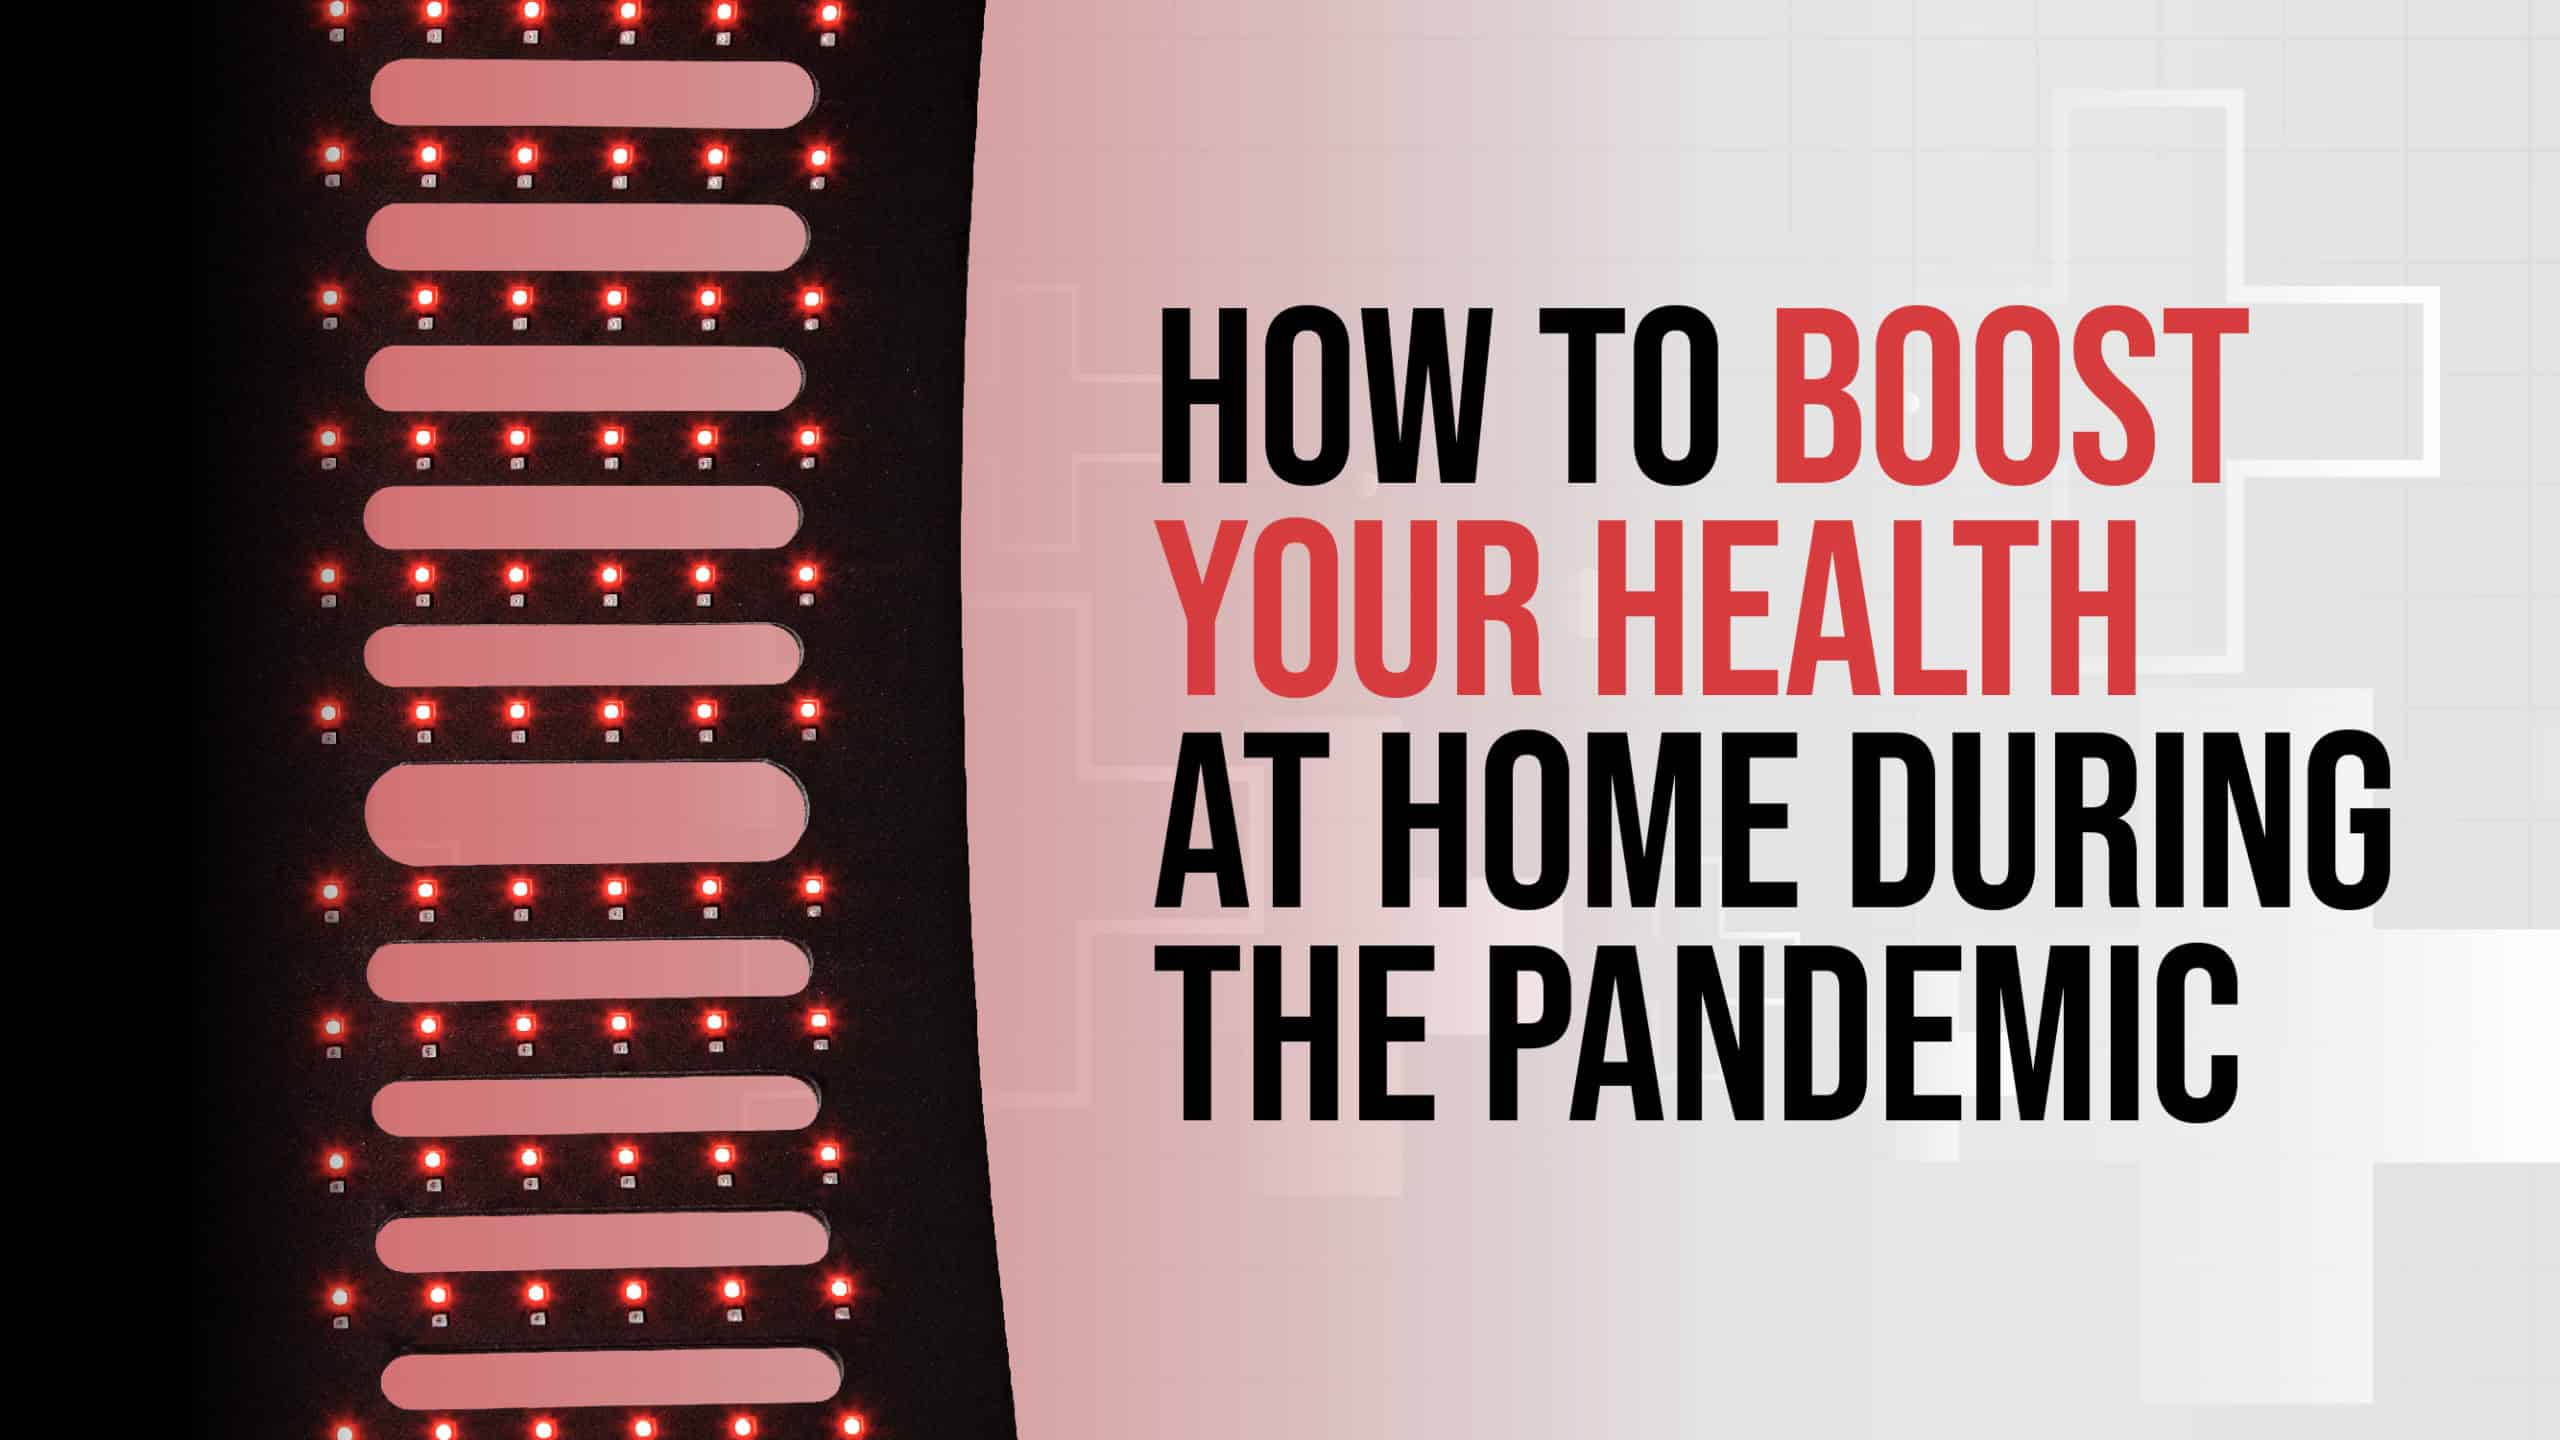 How To Boost Your Health At Home During The Pandemic